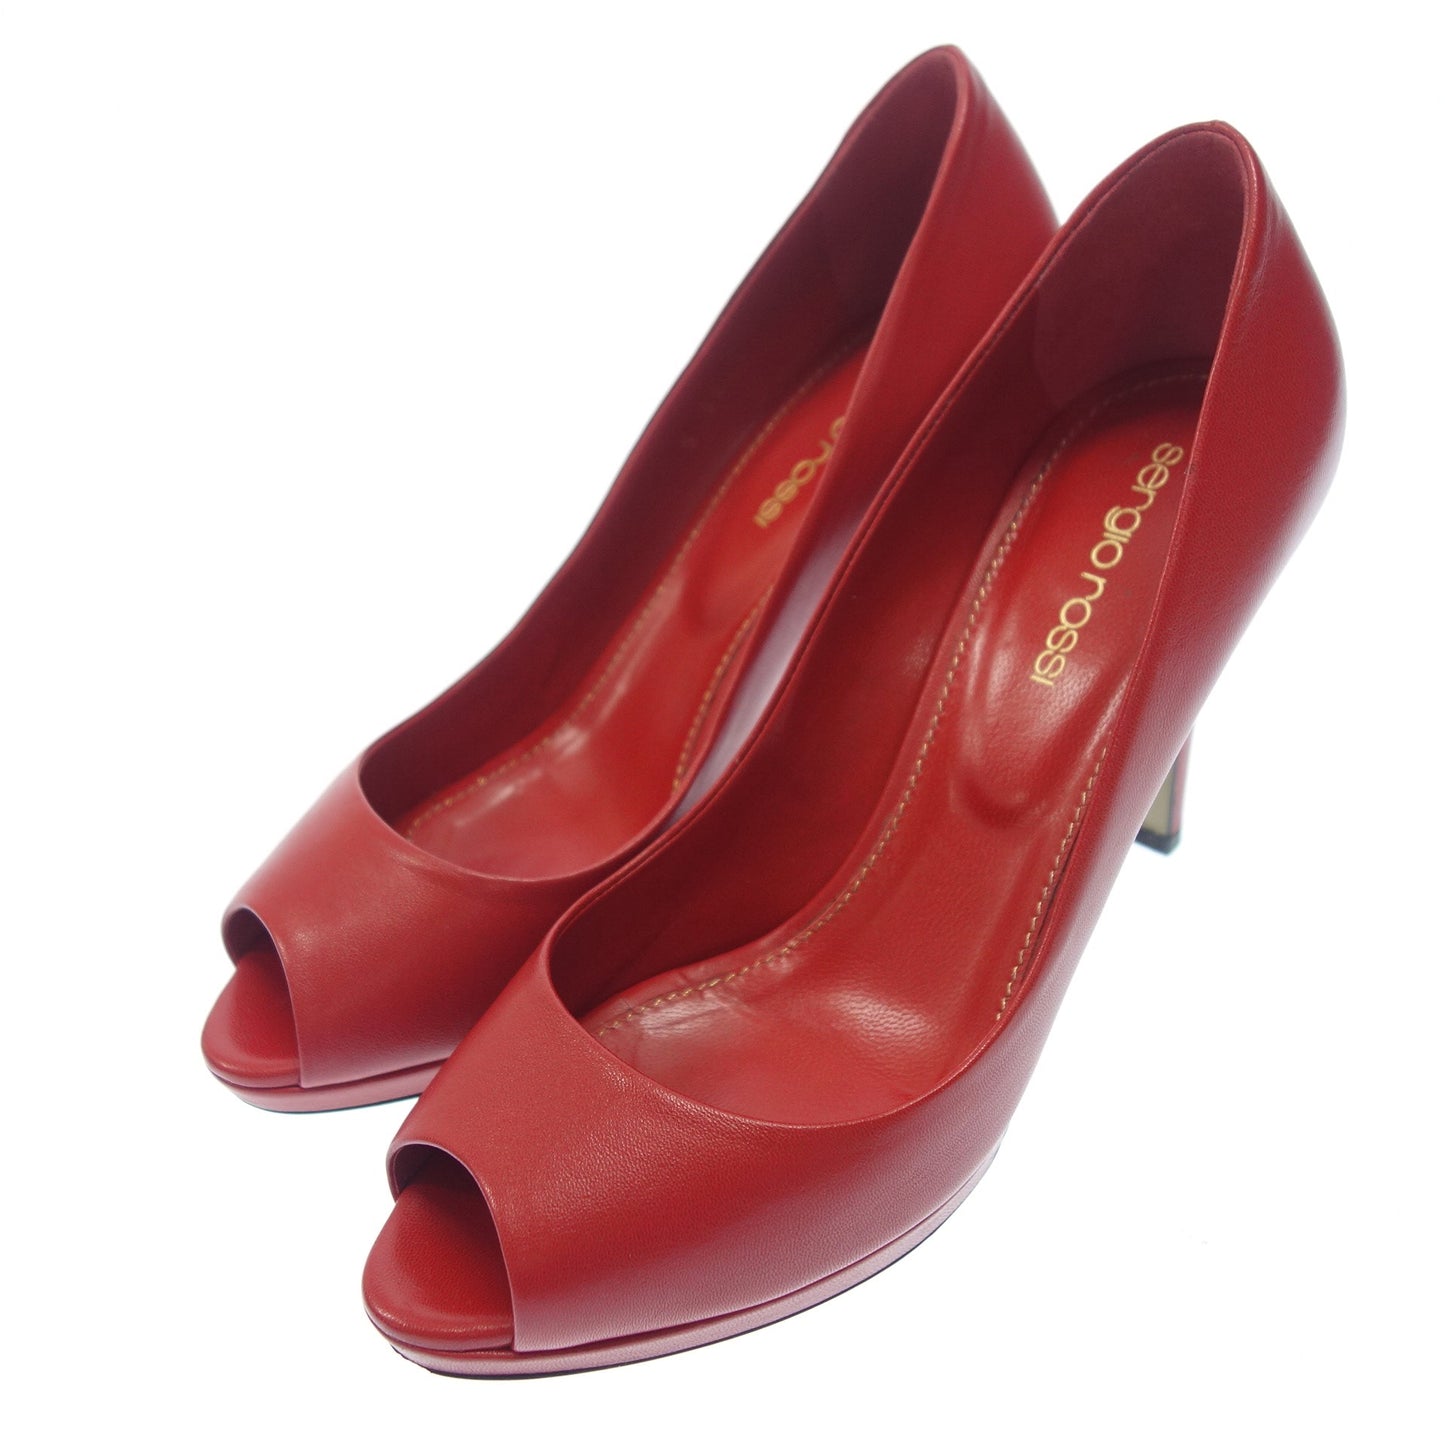 Sergio Rossi heel pumps open toe women's 36.5 red with box Sergio Rossi [AFD4] [Used] 